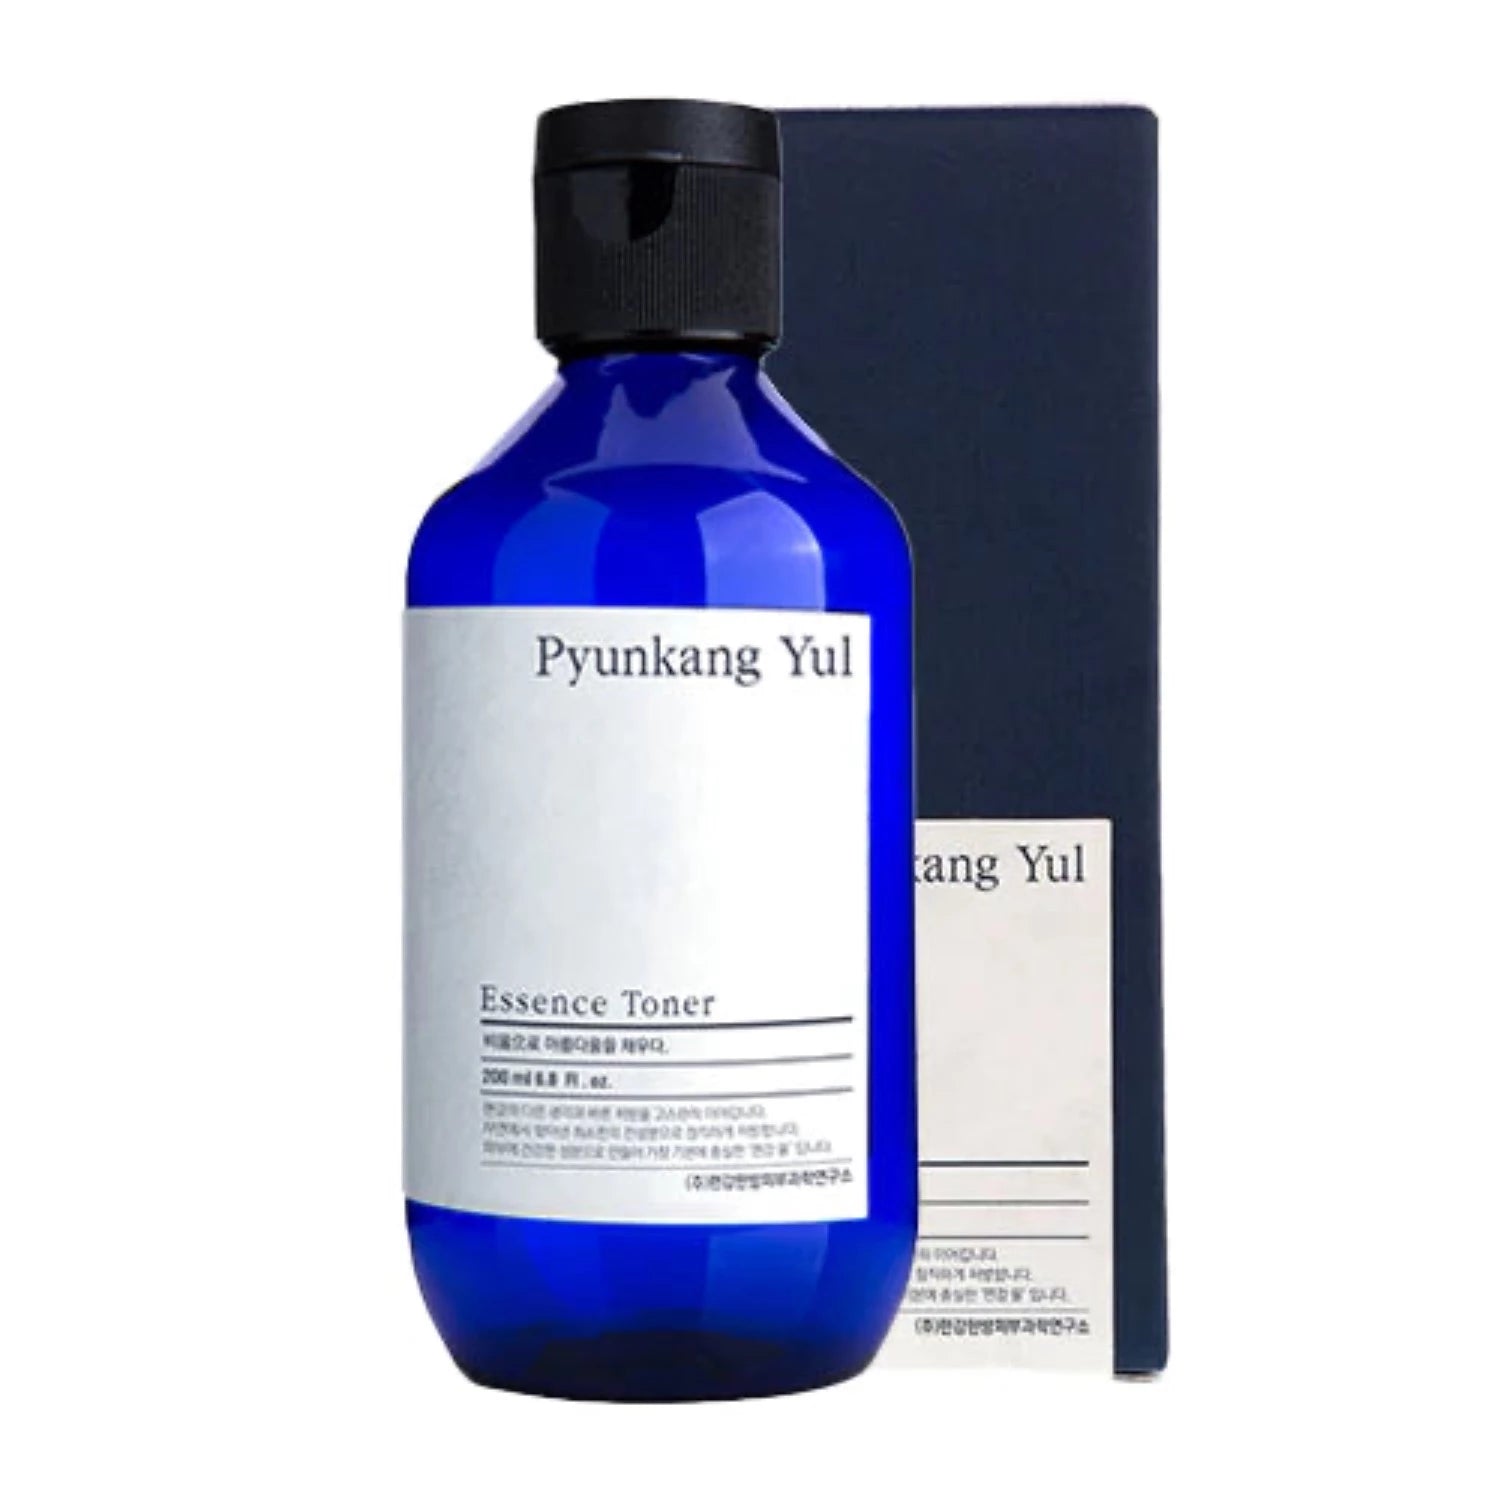 Pyunkang Yul Essence Toner has earned its reputation as a top-choice product, thanks to its impressive 91% concentration of Milk Vetch Root Extract.